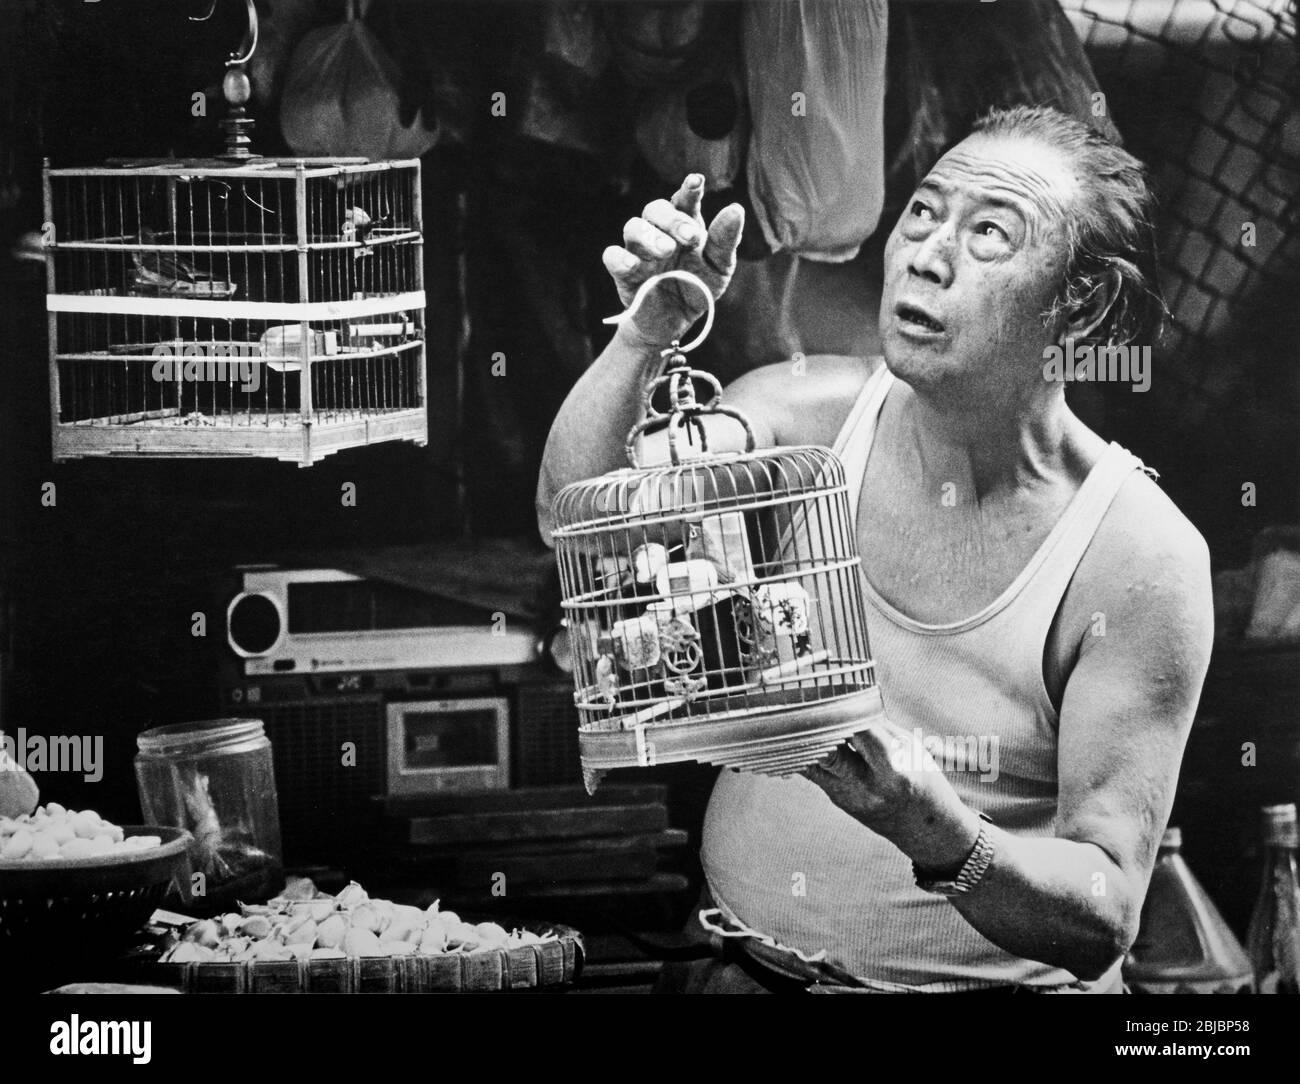 Hong Kong October 1986 Songbird seller, Wan Chi market. The picture is is part of a collection of photographs taken in Hong Kong between September and November, 1986. They represent a snapshot of Daily Life in the Crown Colony eleven years before sovereignty was transferred back to mainland China. Photograph by Howard Walker / Alamy. Stock Photo